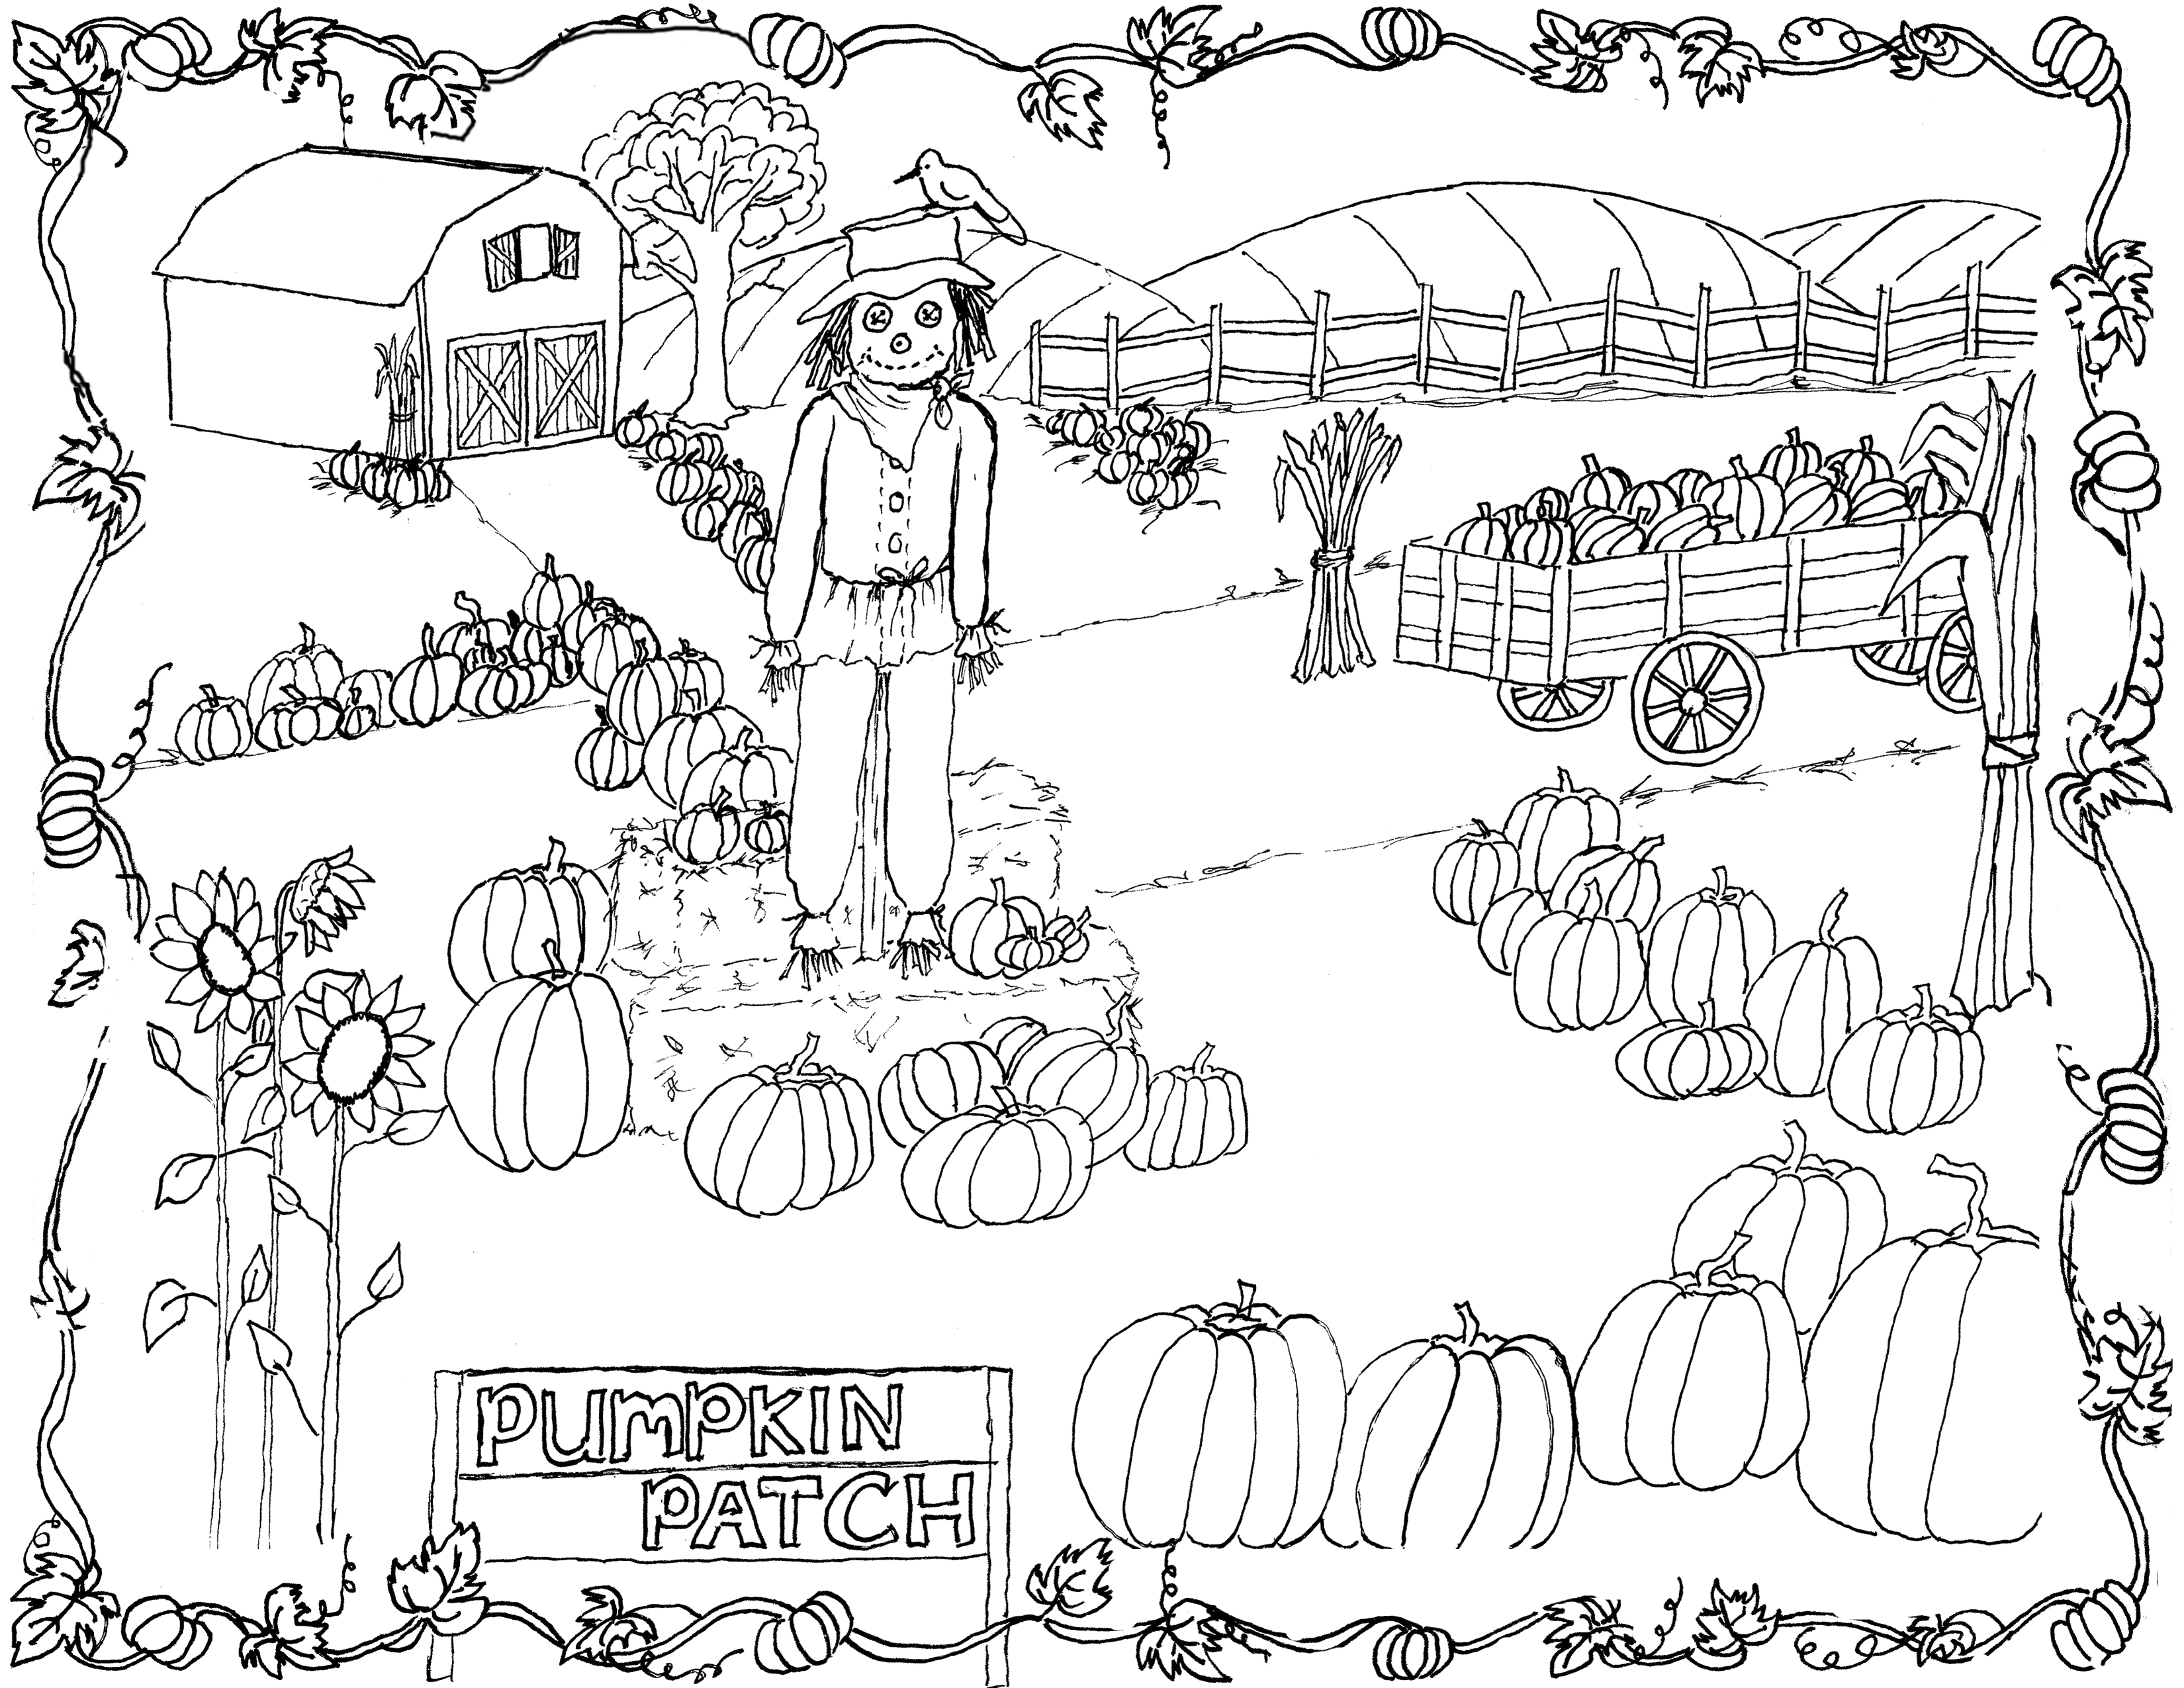 Pumpkin Patch Coloring Pages Printable at Free